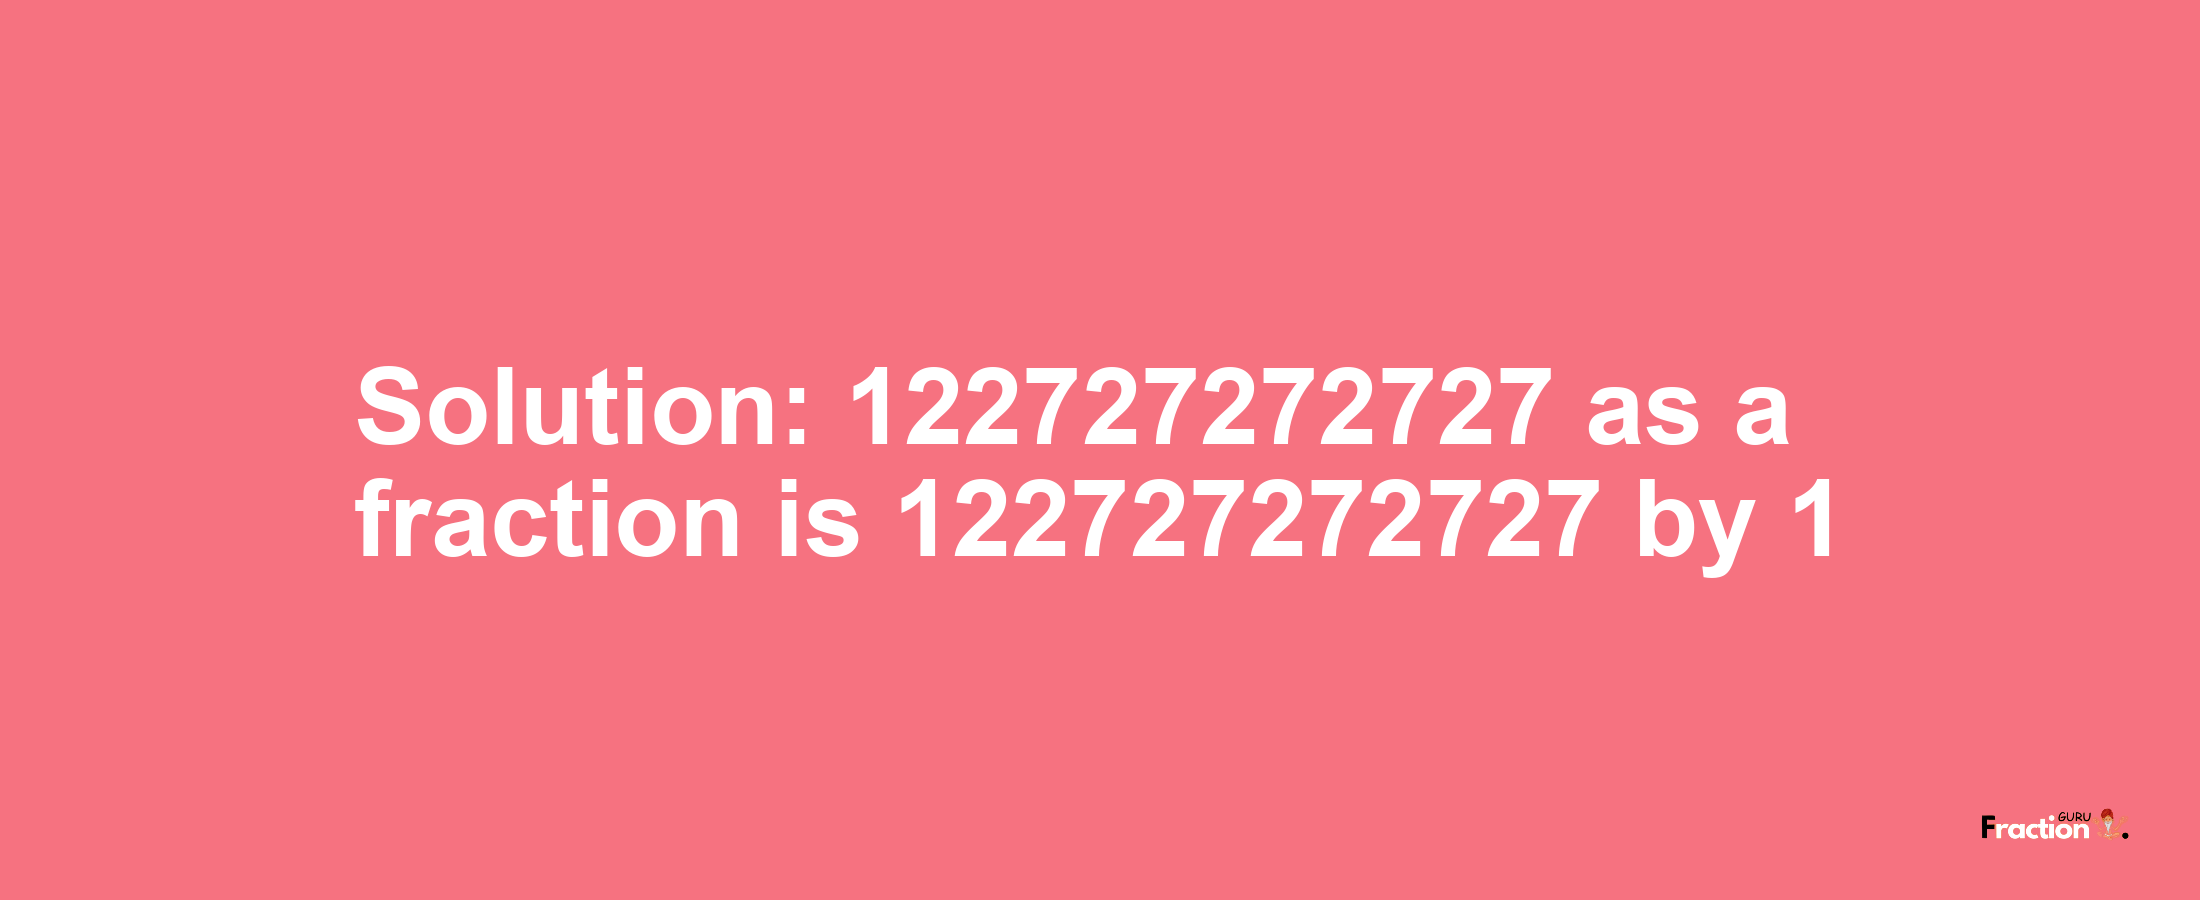 Solution:122727272727 as a fraction is 122727272727/1